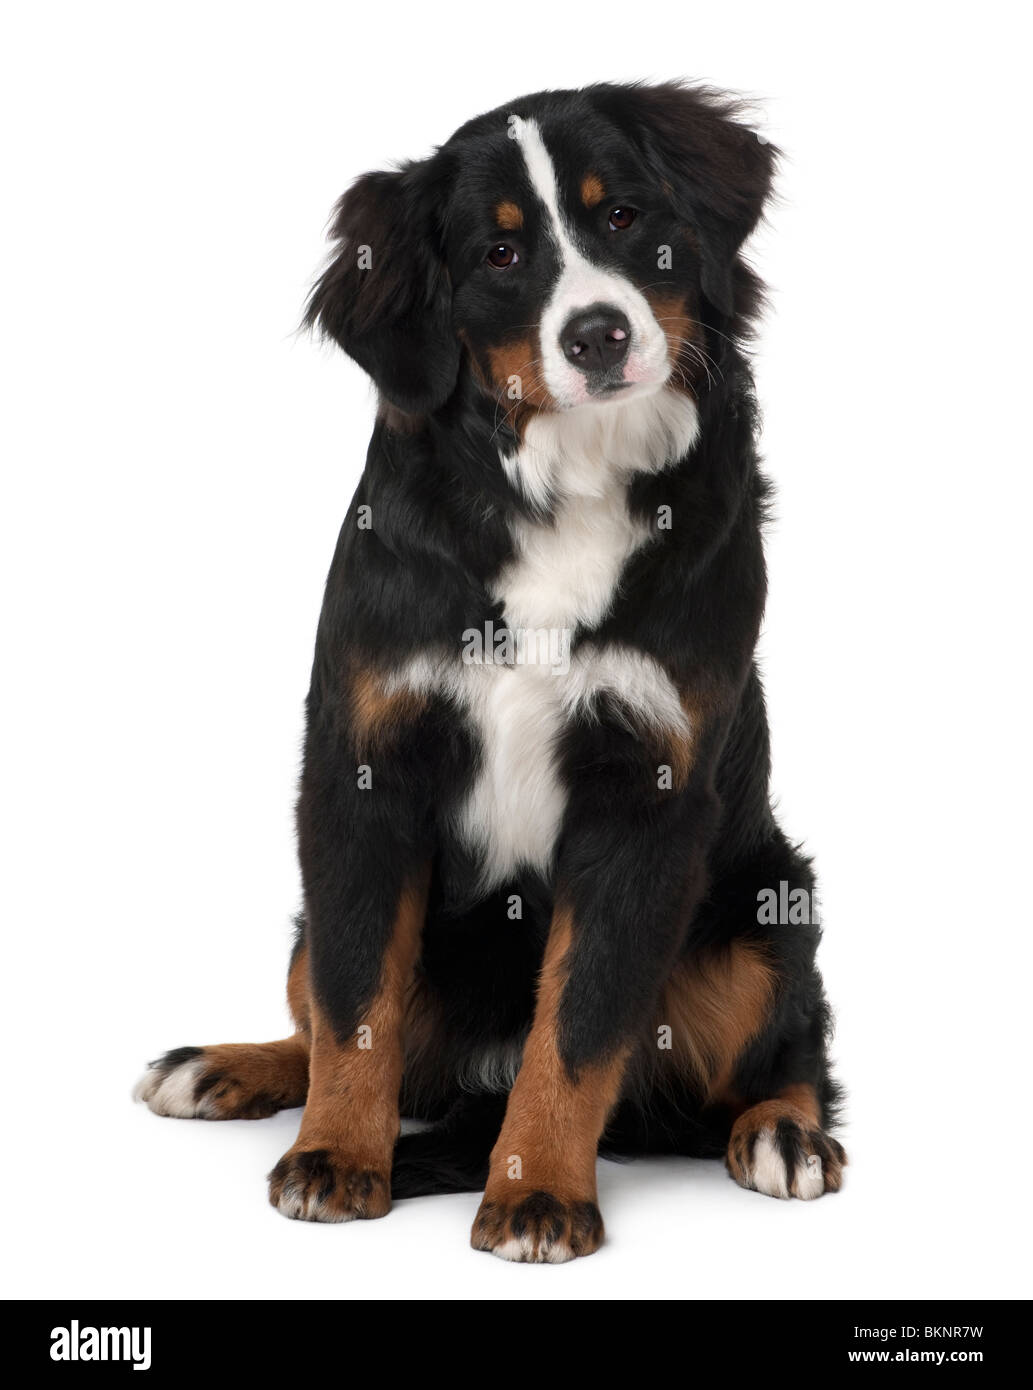 Bernese mountain dog puppy, 6 months old, sitting in front of white background Stock Photo